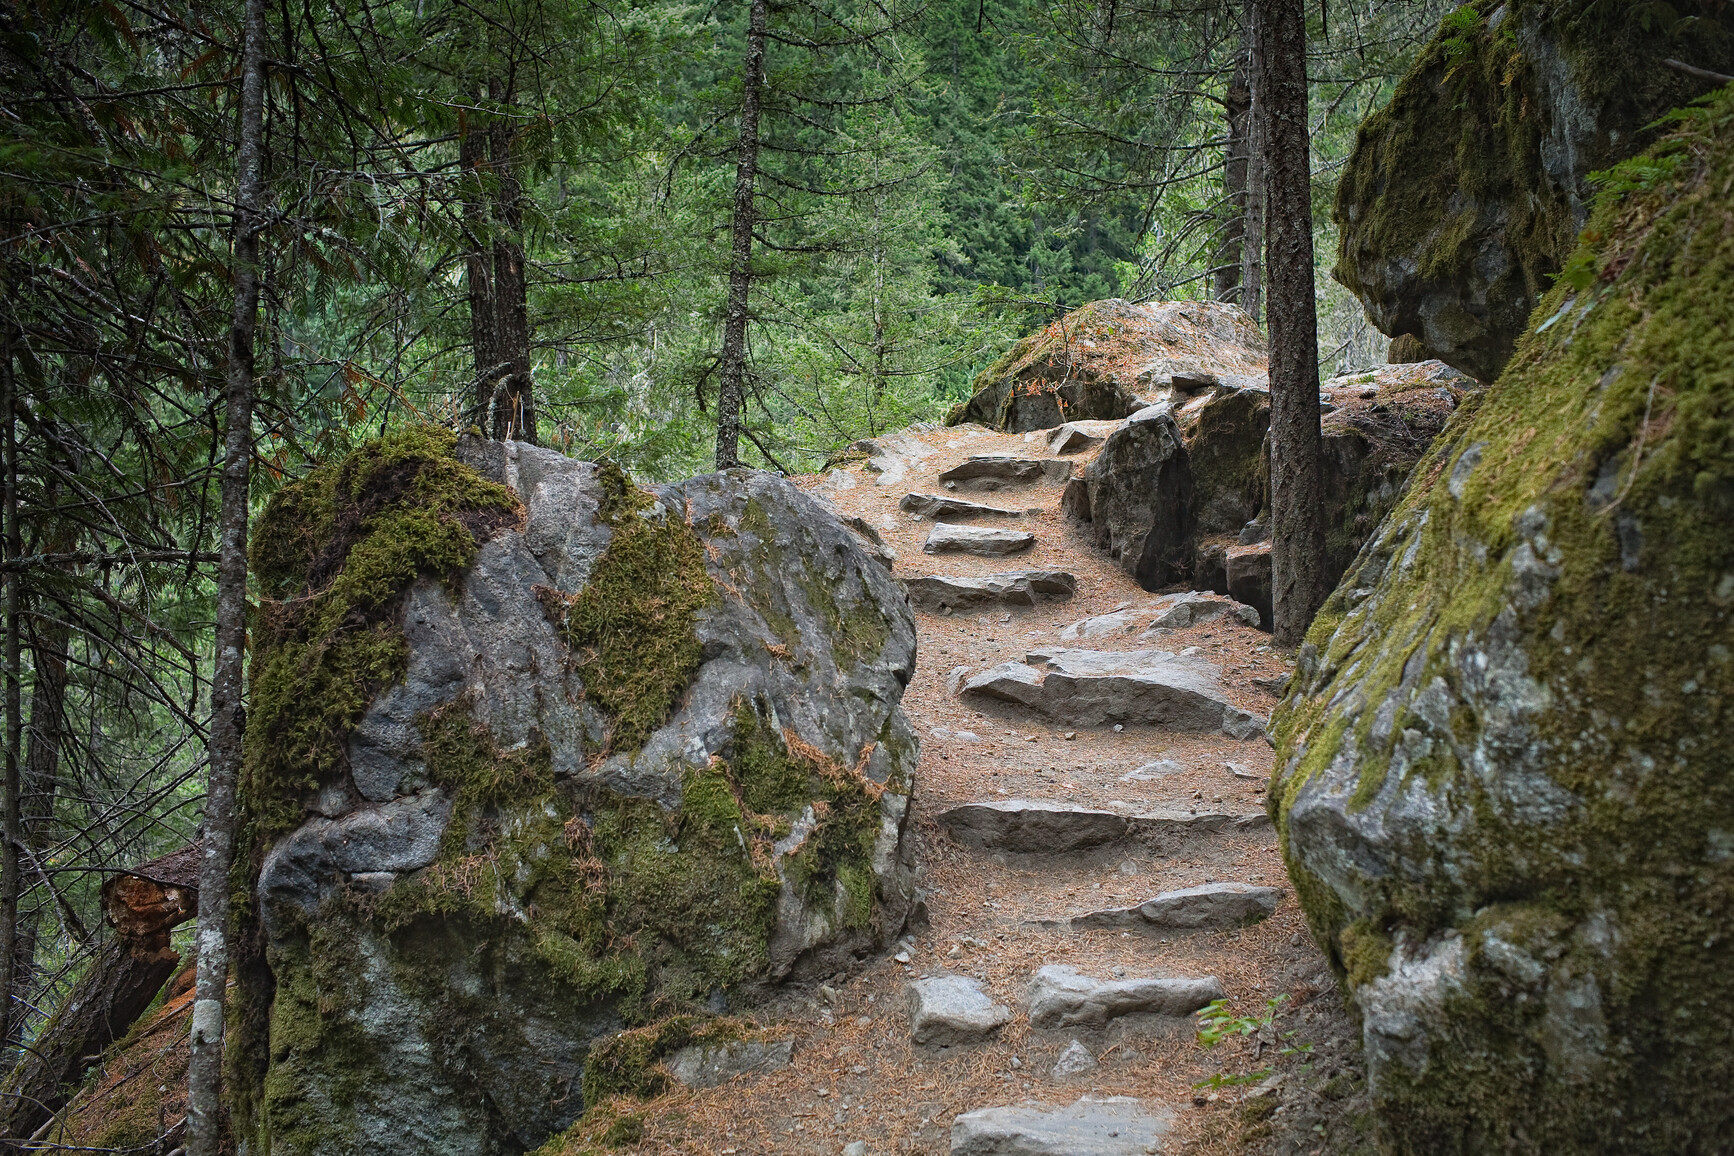 Trail with rock stairs. Forest in background.